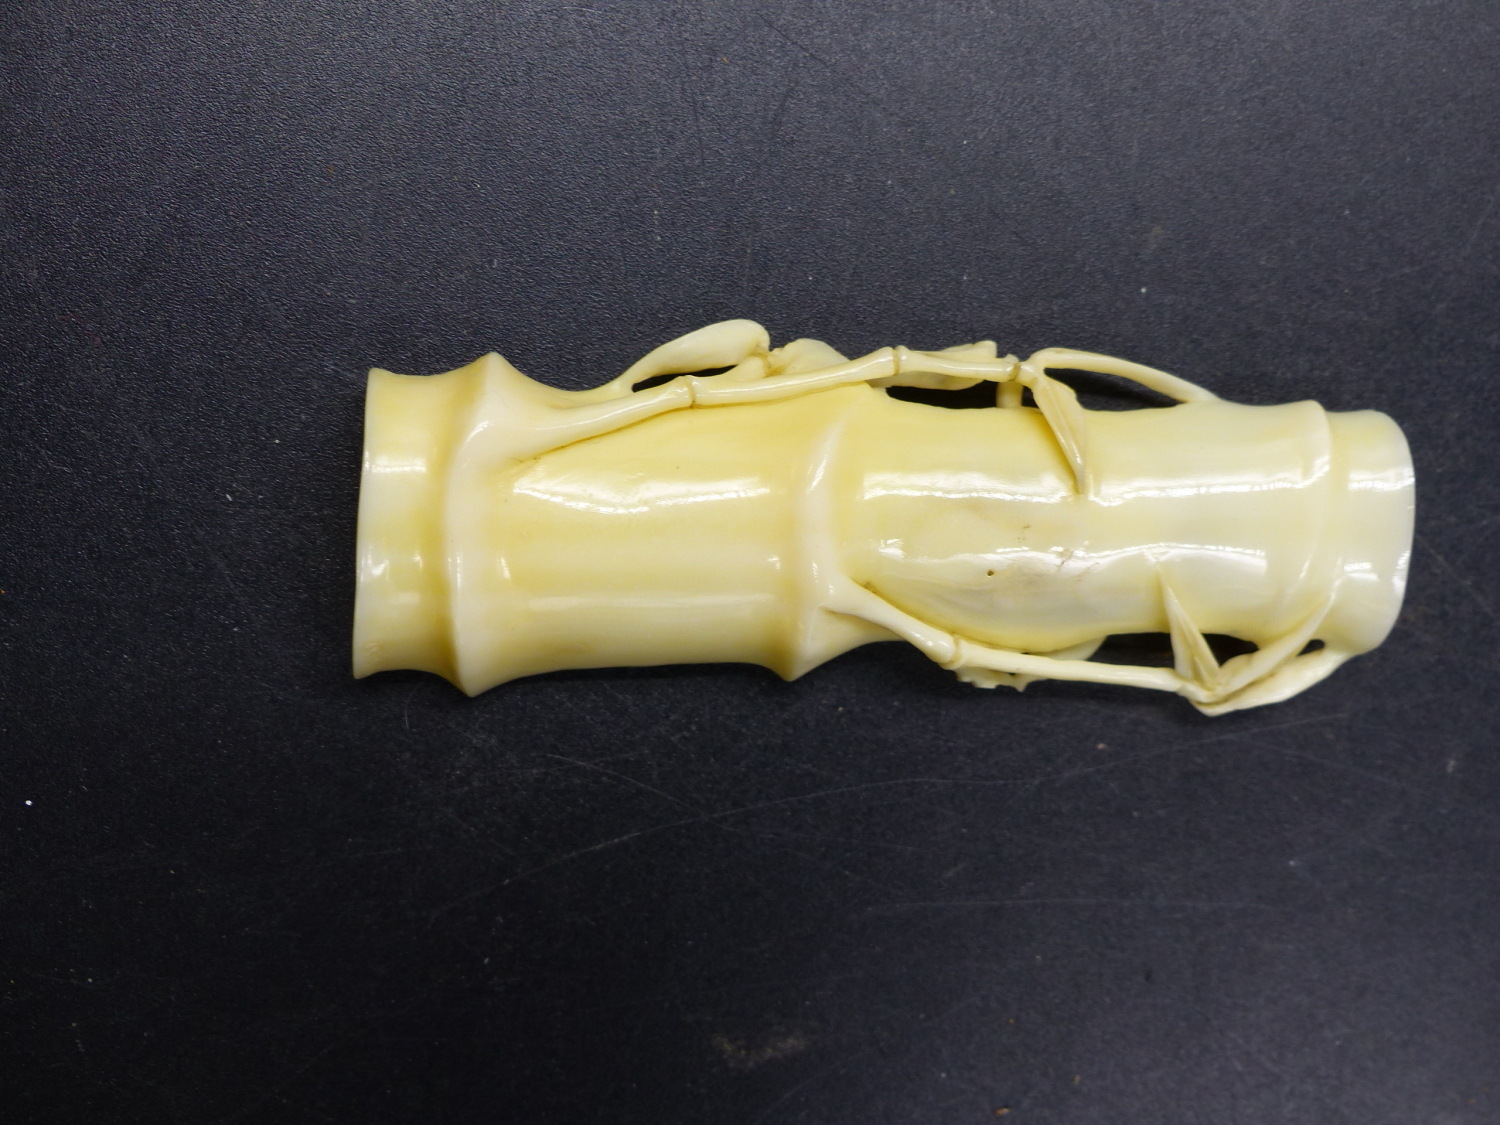 A JAPANESE MARINE IVORY OKIMONO CARVED AS A SPLIT SECTION OF BAMBOO CONTAINING A CONFRONTATION OF